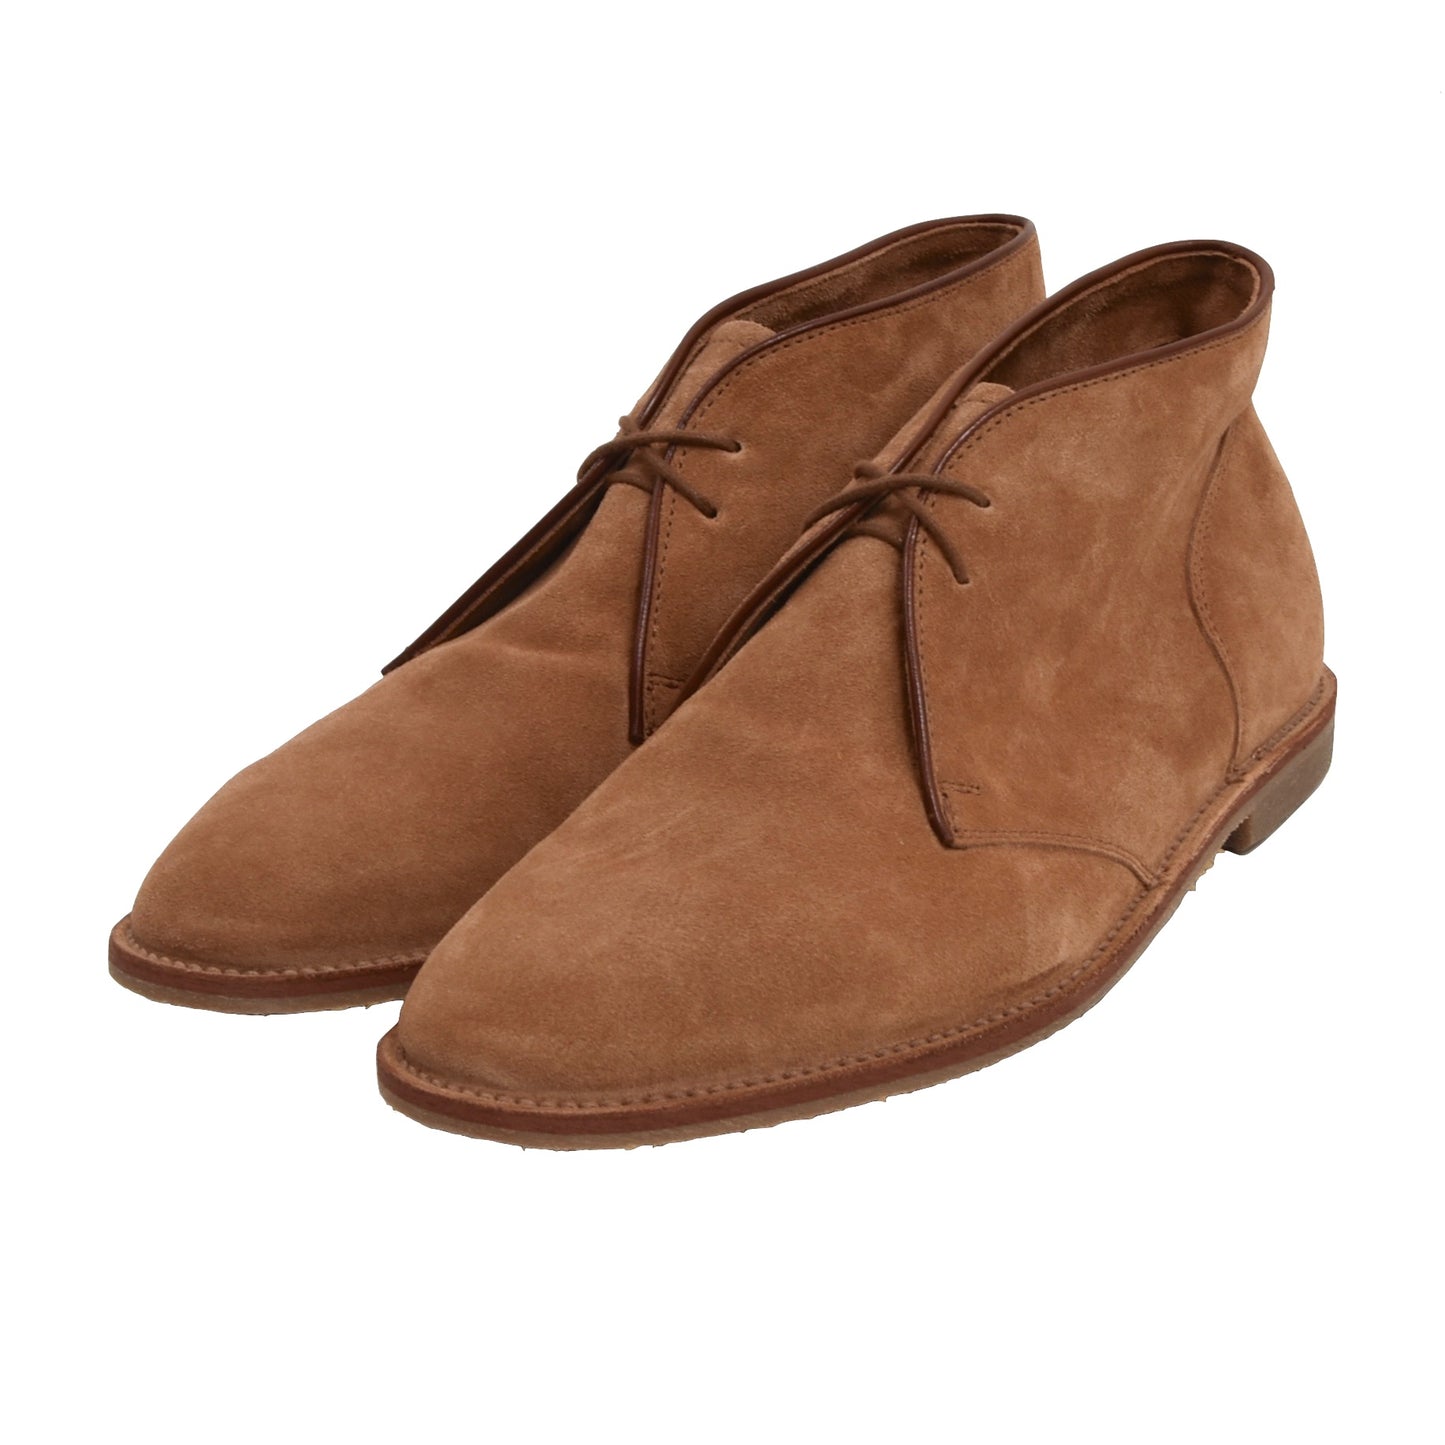 NEW Ludwig Reiter Suede Chukka Boots Size 9 - Camel